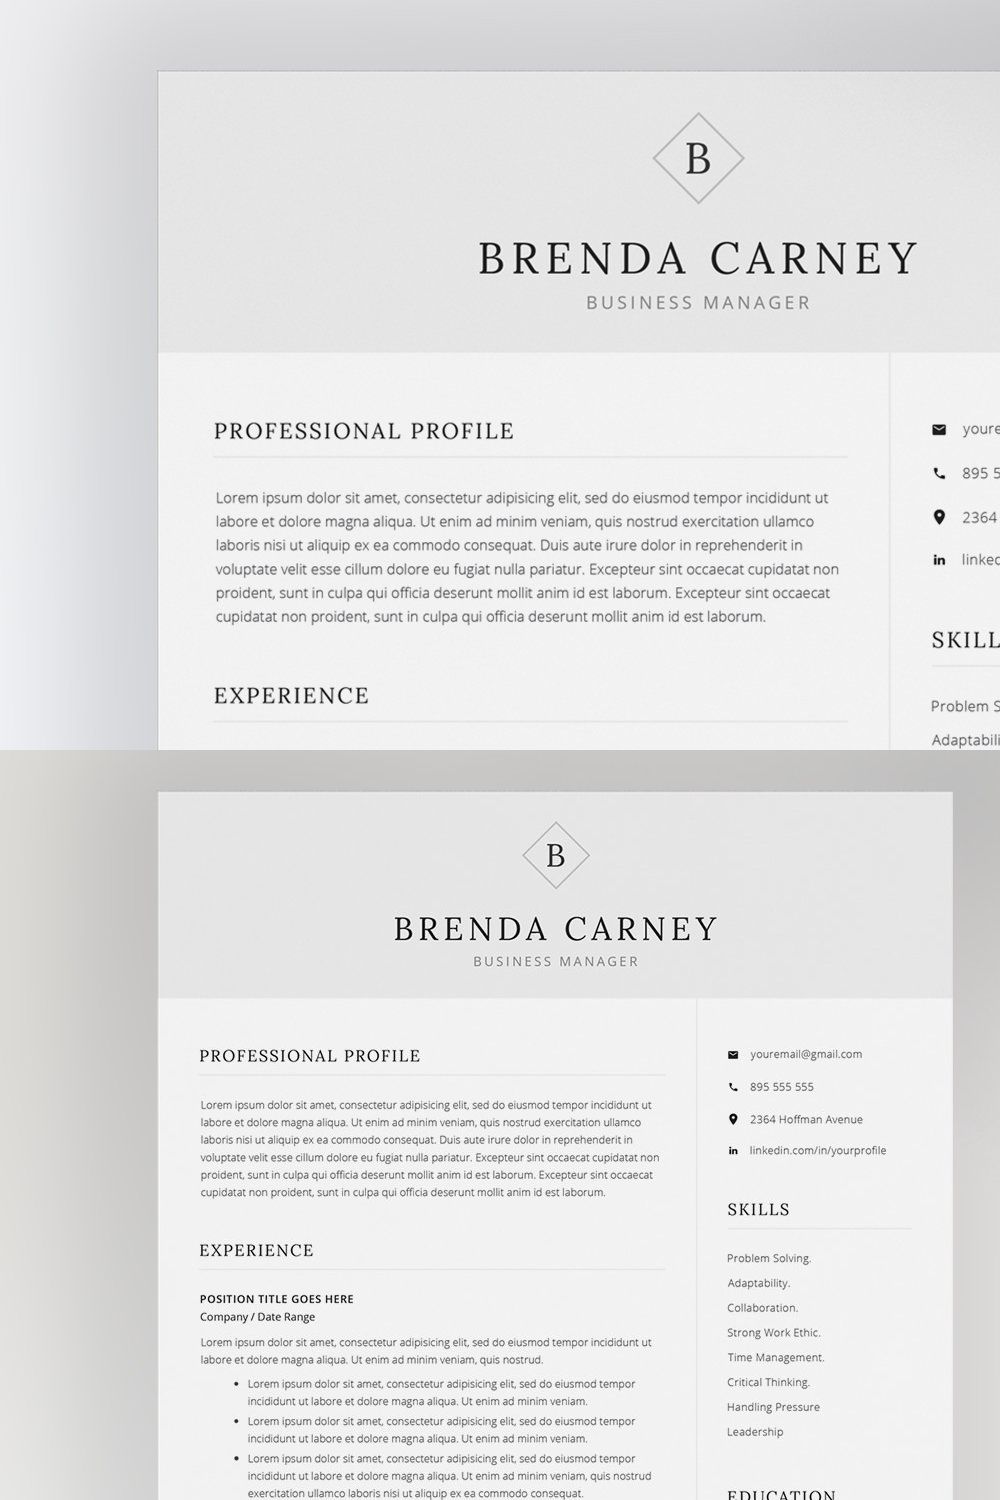 Clean Resume CV pinterest preview image.